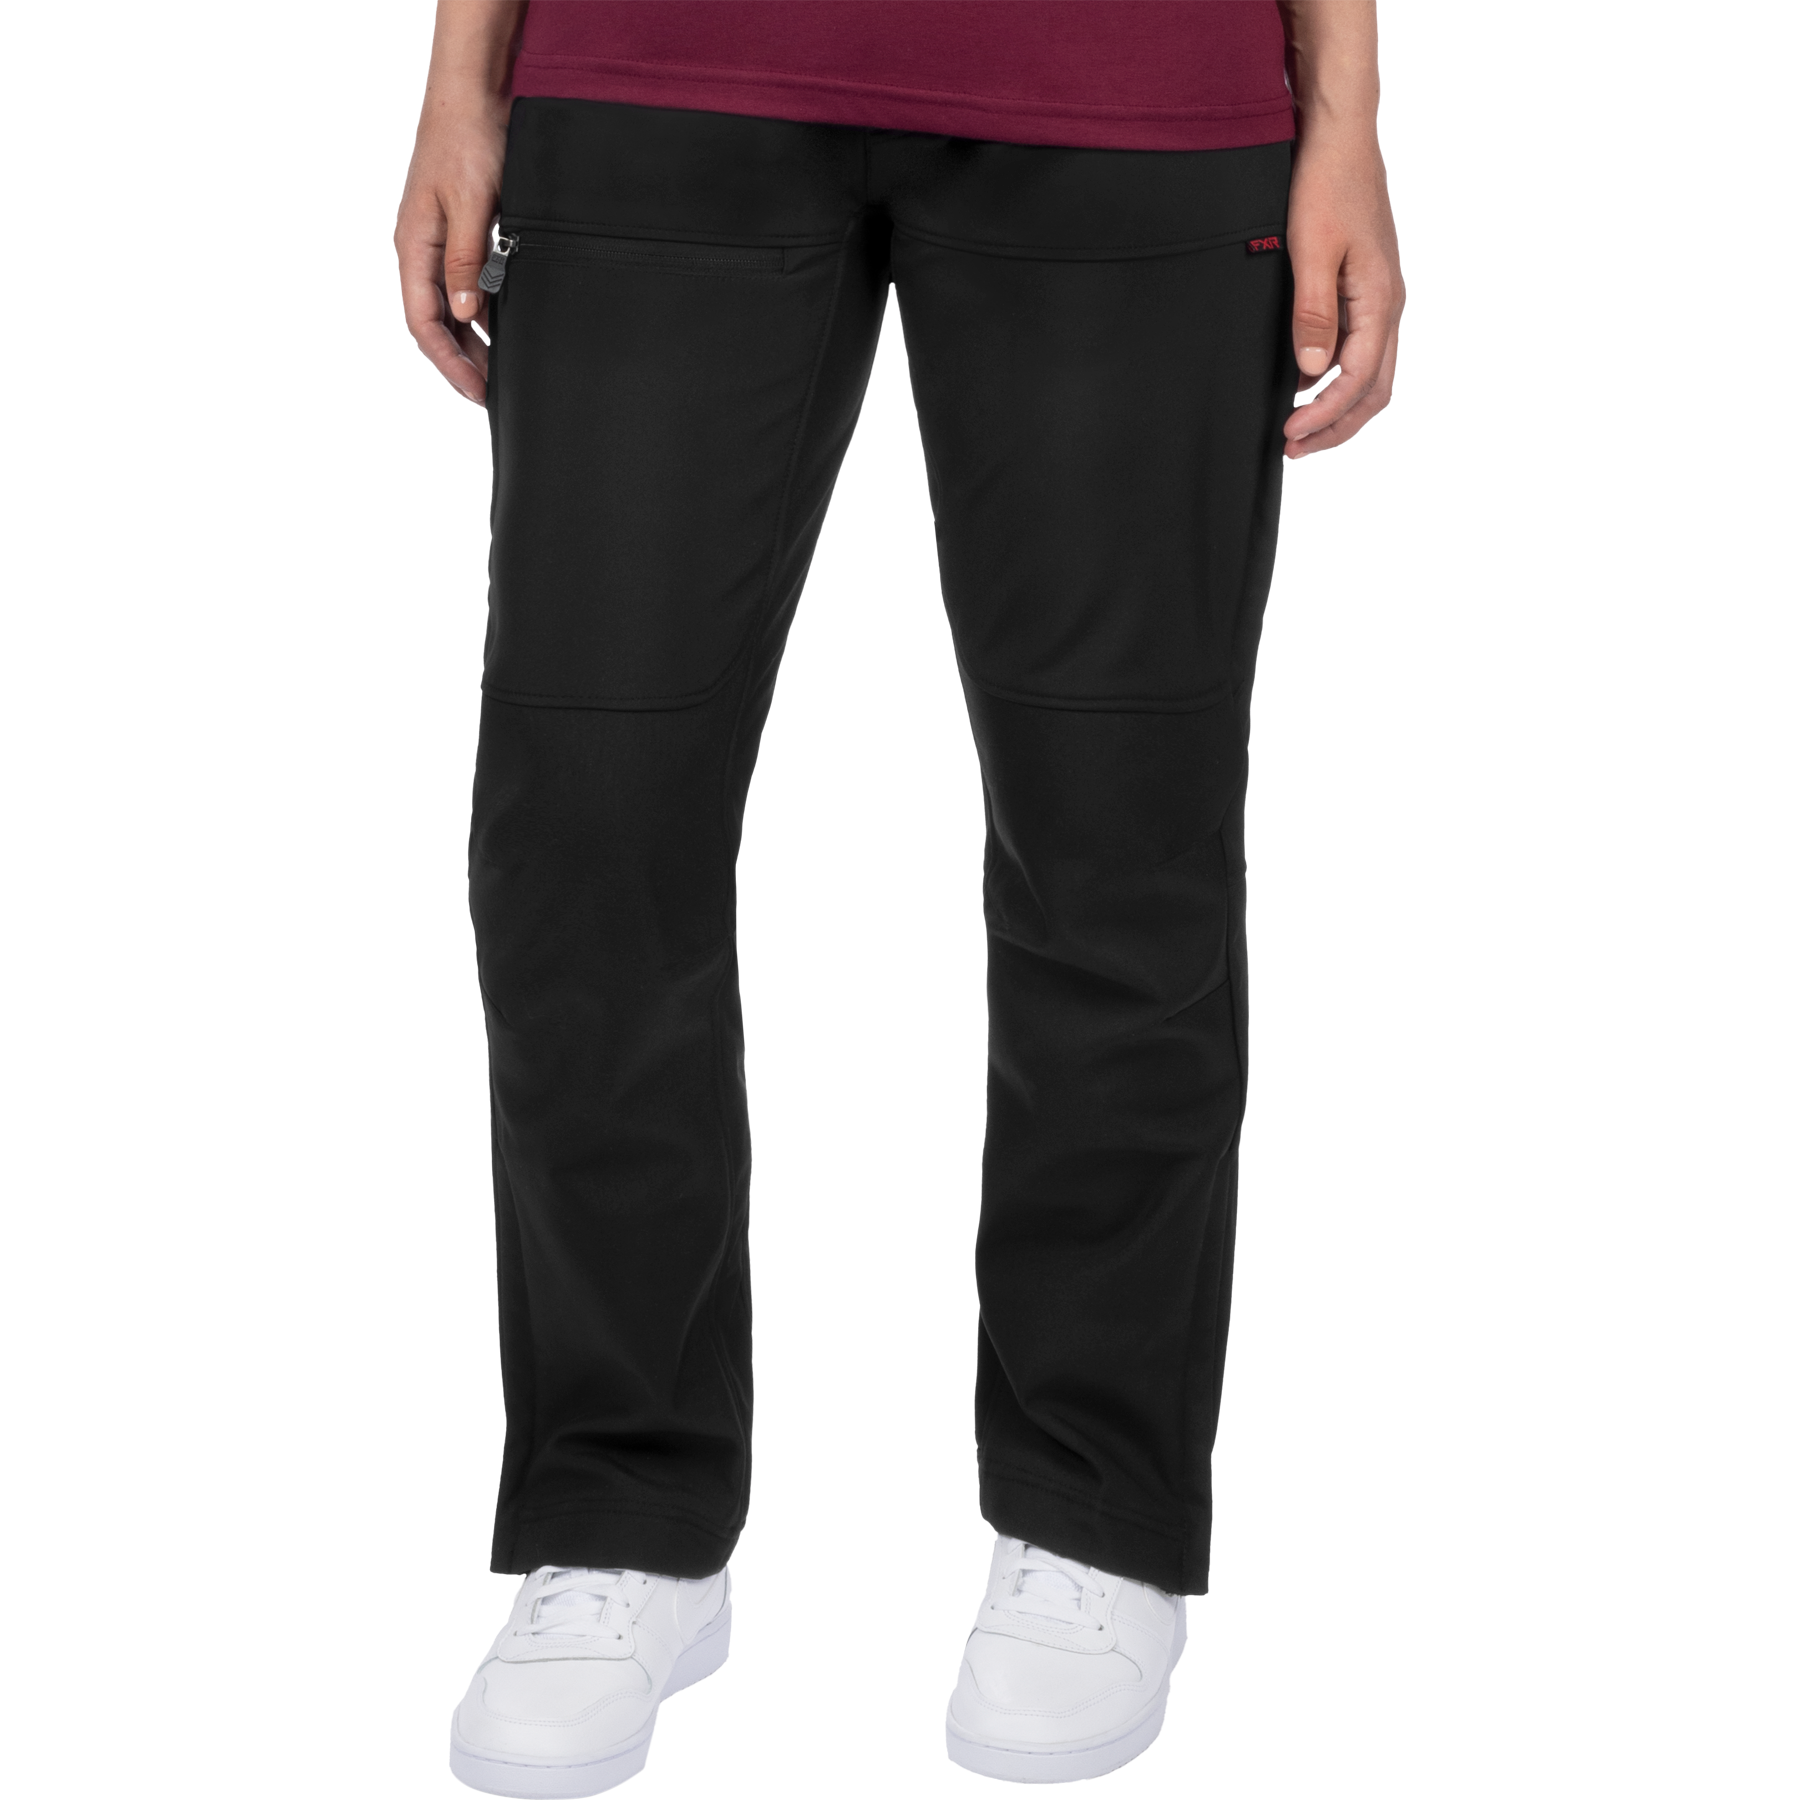 fxr racing pants for womens altitude softshell